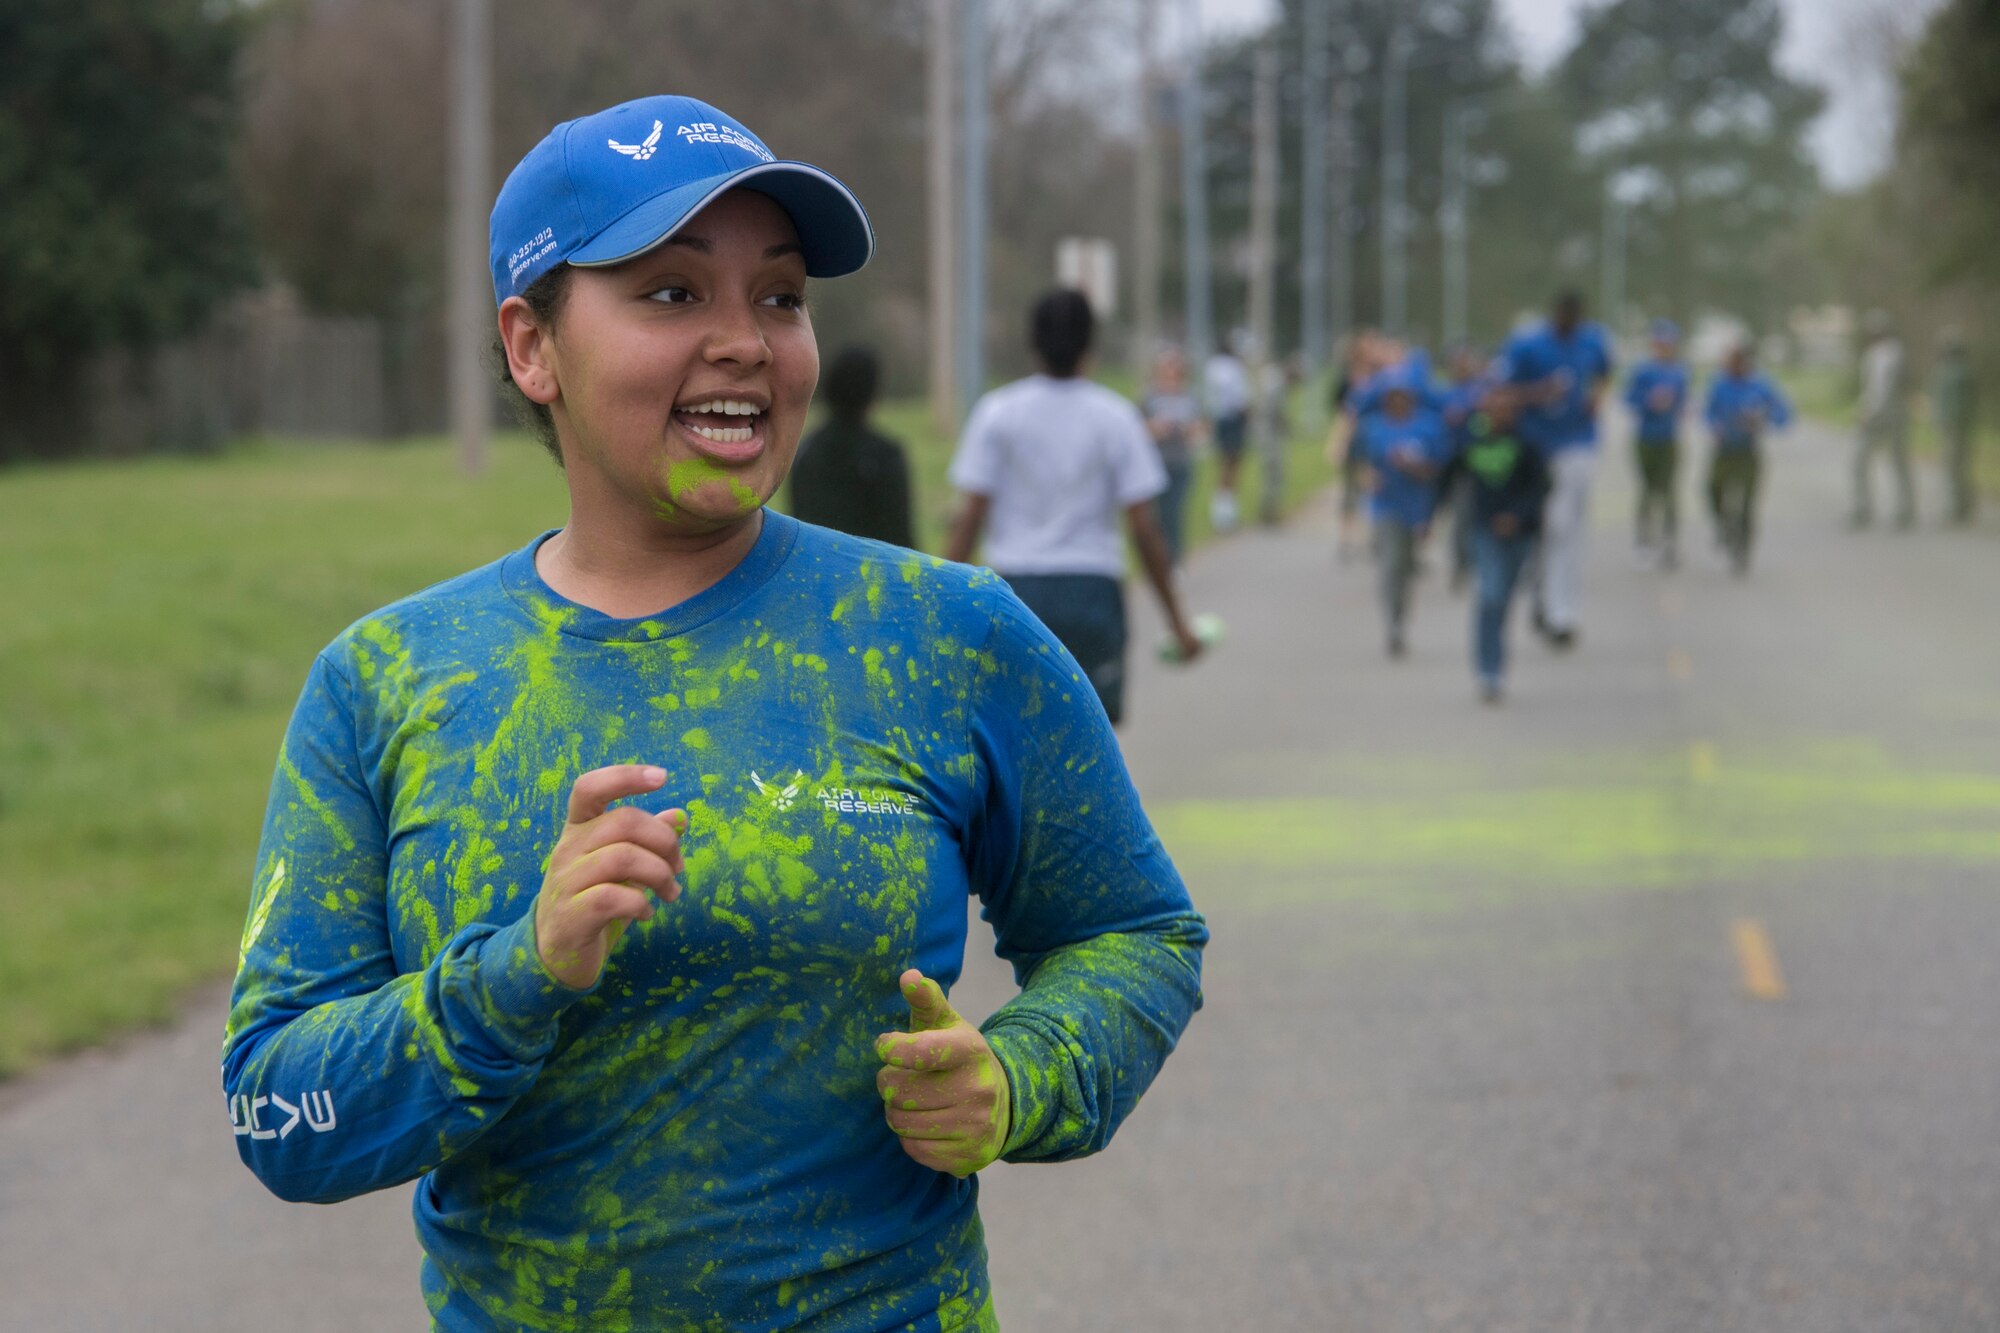 A member of the 307th Bomb Wing's Delayed Entry Program heads for the finish line during the 307th Force Support Squadron Shamrock 5K at Barksdale Air Force Base, Louisiana, March 2, 2019. More than fifty runners, including Reserve Citizen Airmen and their families, participated in the event. (U.S. Air Force photo by Staff Sgt. Callie Ware)